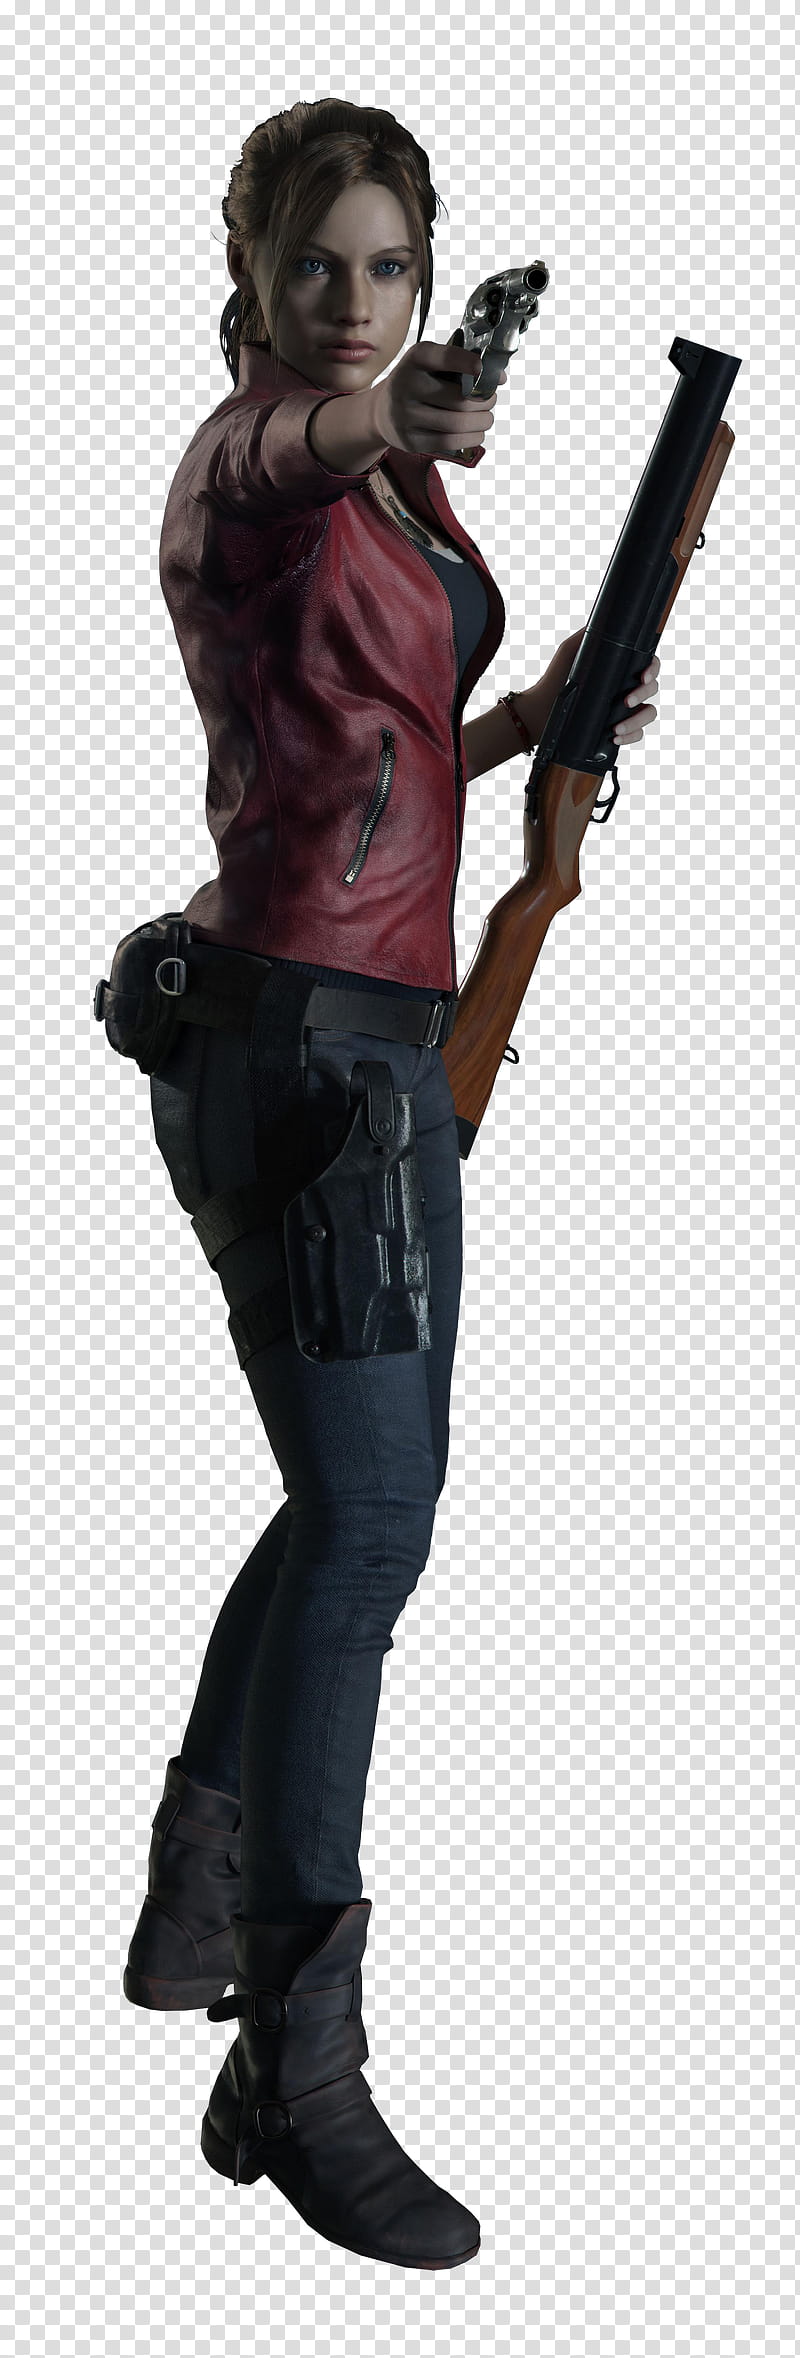 Jeans, Resident Evil 2, Claire Redfield, Leon S Kennedy, Resident Evil Revelations, Ada Wong, Chris Redfield, Resident Evil Revelations 2 transparent background PNG clipart